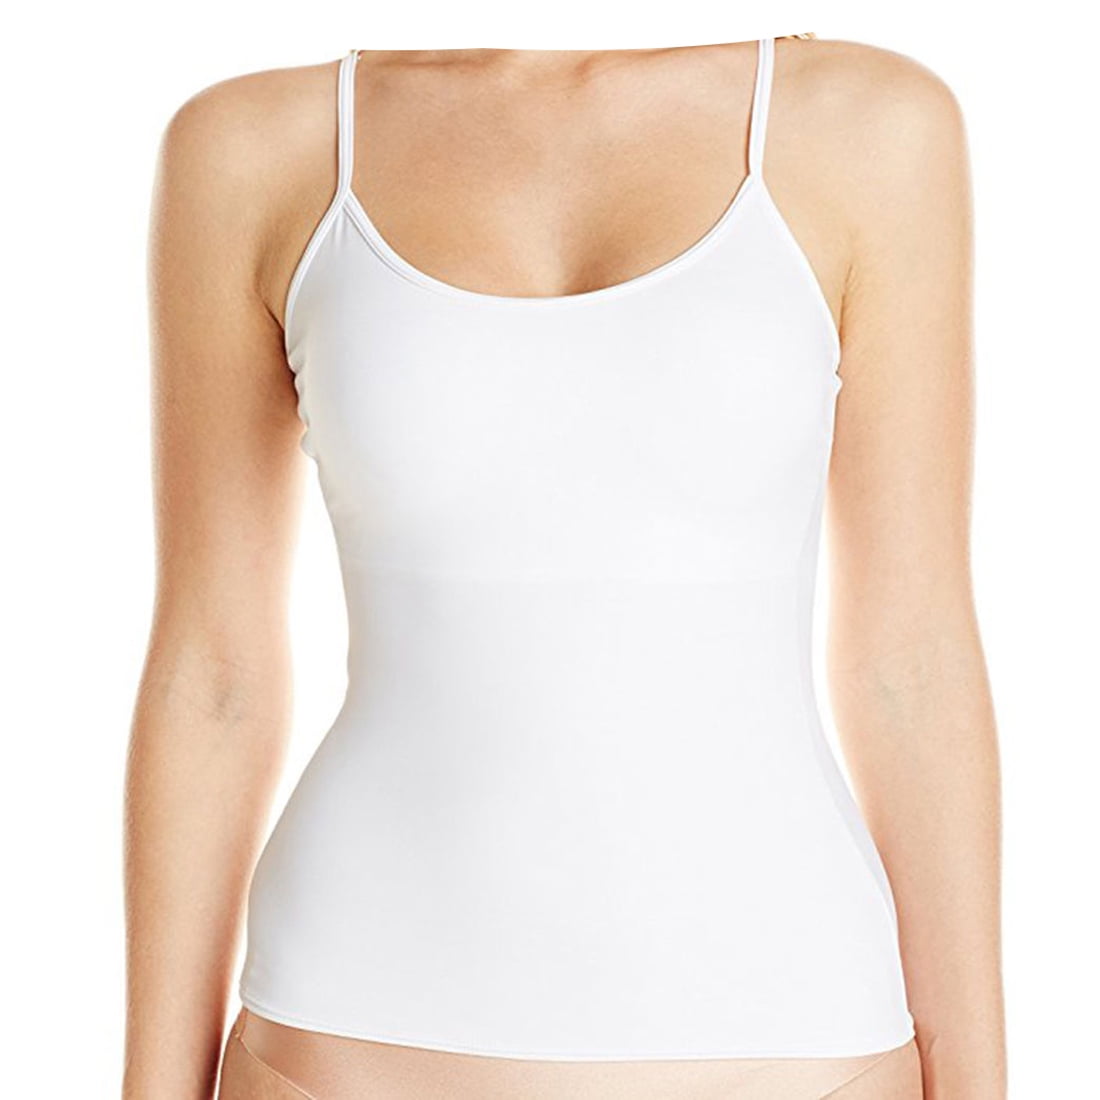 Assets By Spanx, Intimates & Sleepwear, New With Tags Assets By Spanx  Womens Shaping Tank Top Size Large White